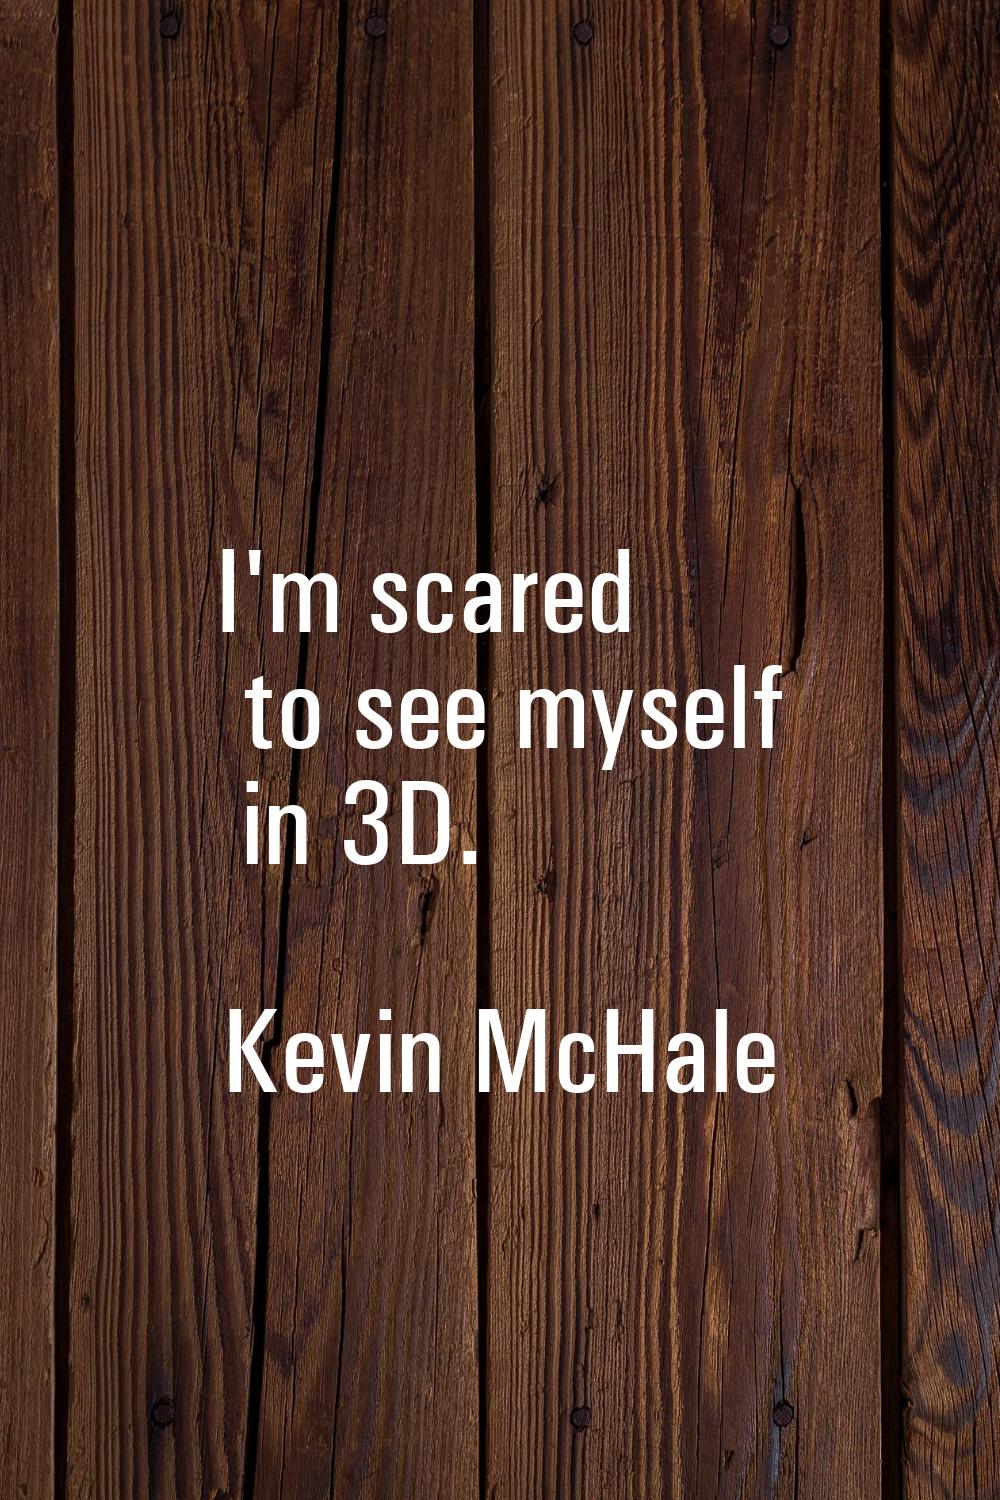 I'm scared to see myself in 3D.